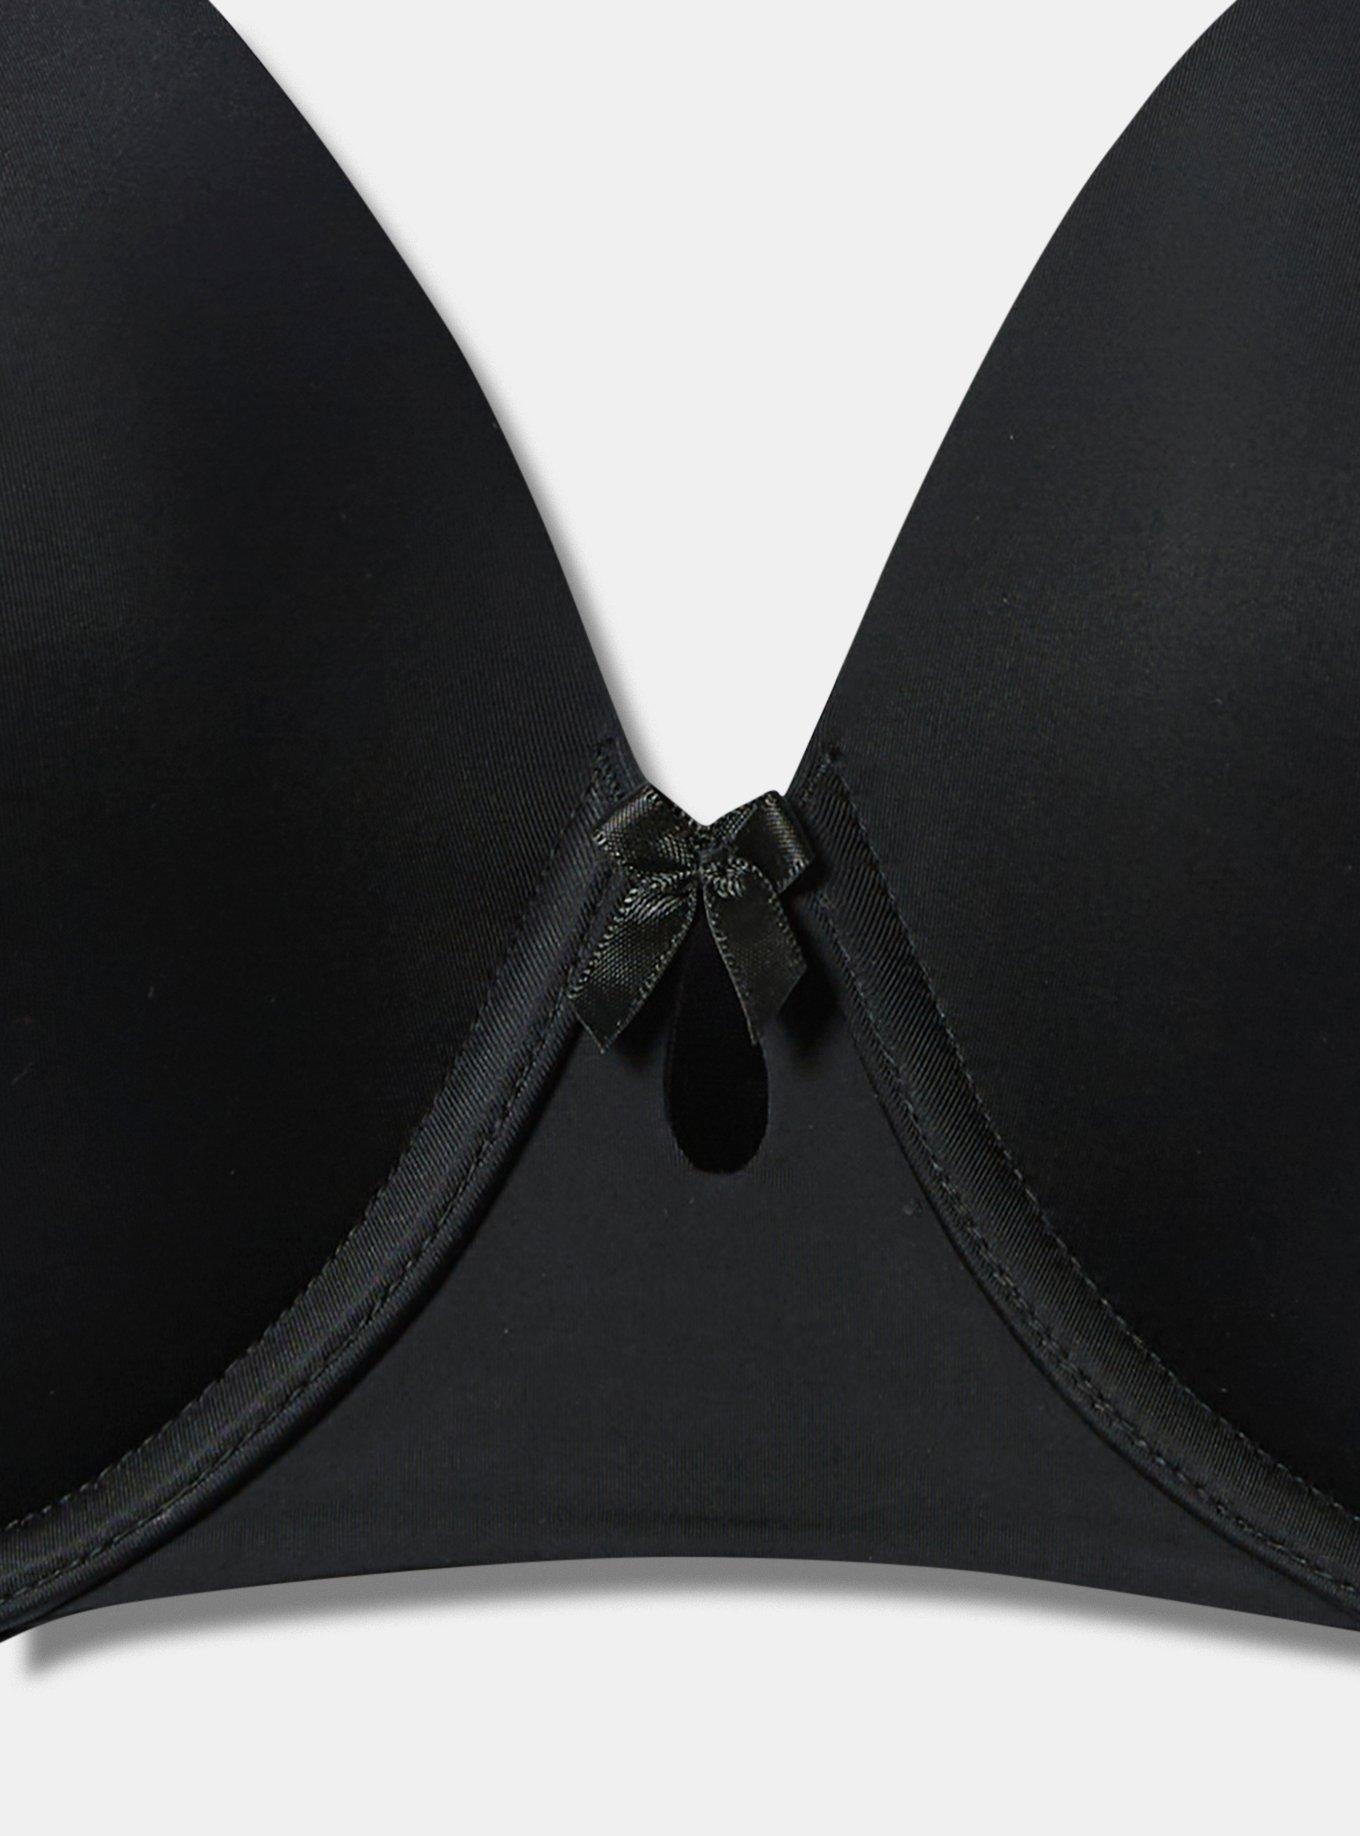 Buy Triumph Wired Strapless Heavily Padded Womens T-Shirt Bra (Black, 36F)  at